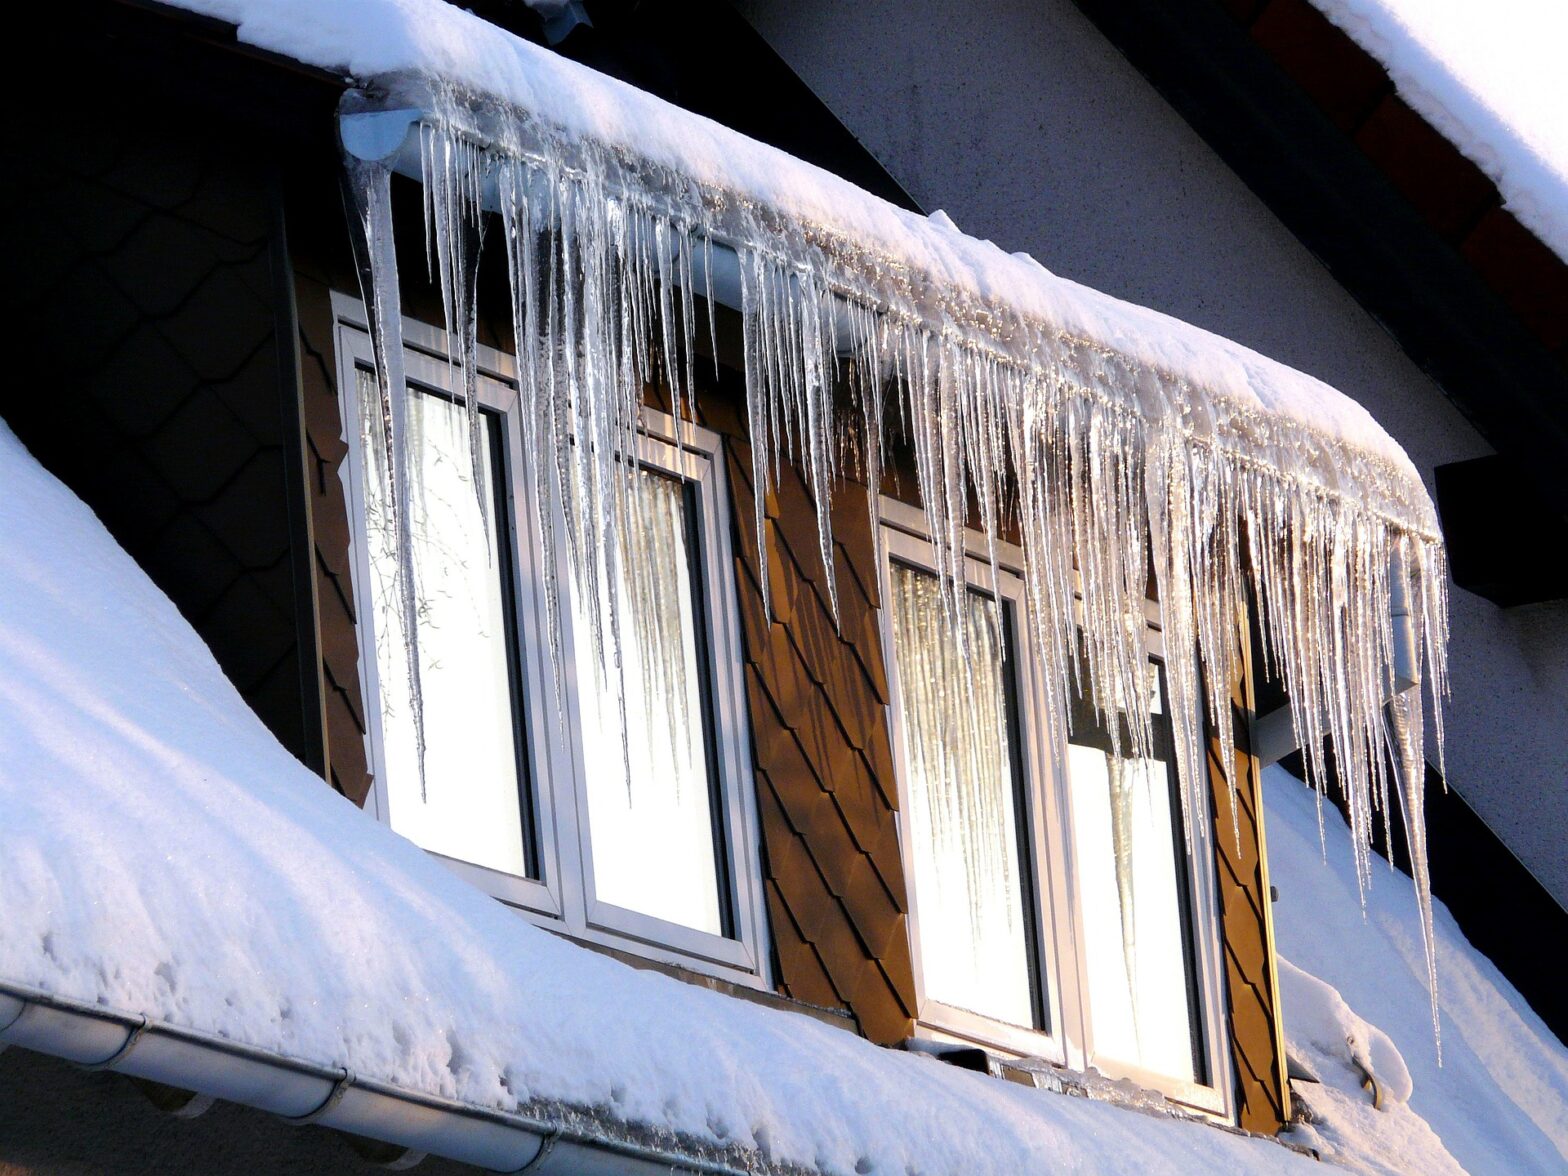 A window with ice stalactite hanging from the roof